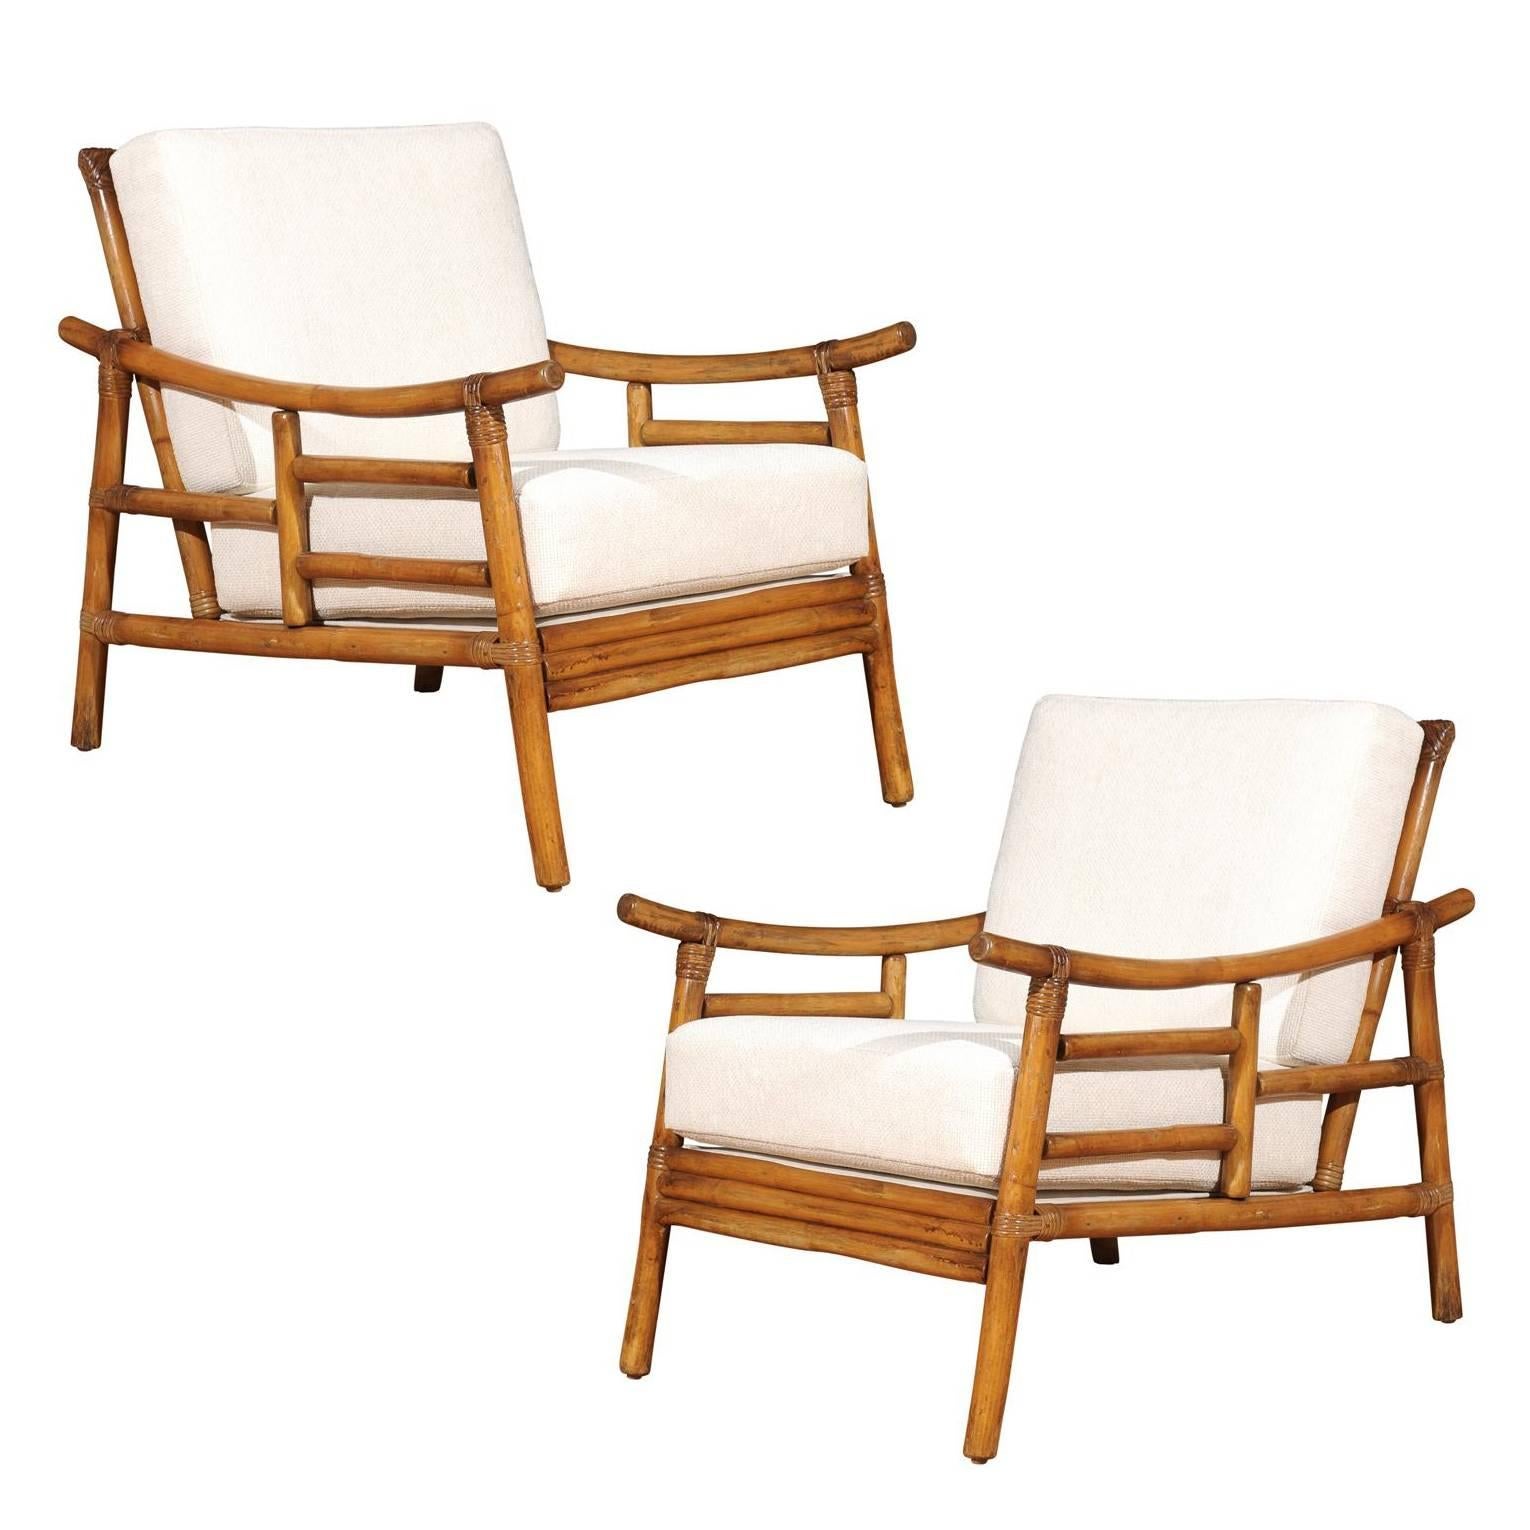 Restored Pair of Early Loungers by John Wisner for Ficks Reed